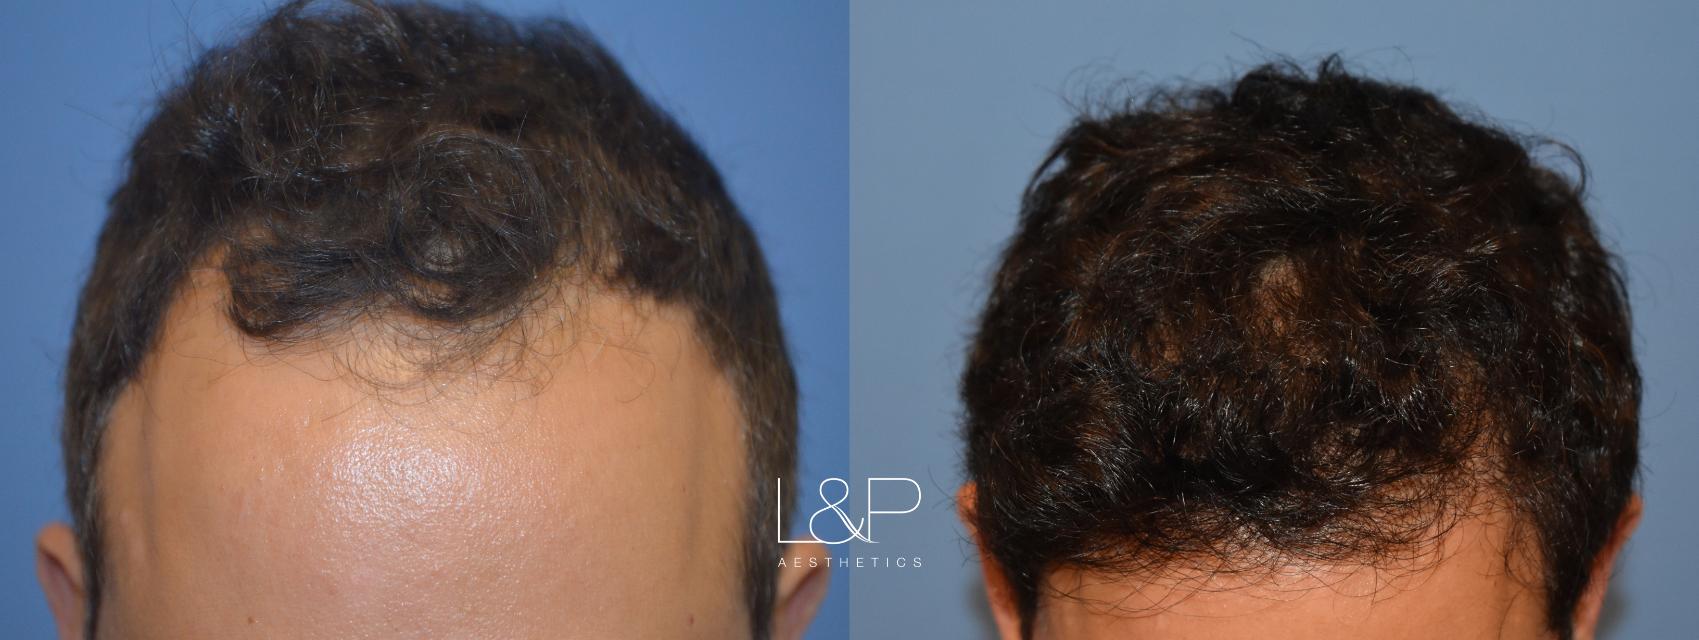 Before and After Hair Restoration